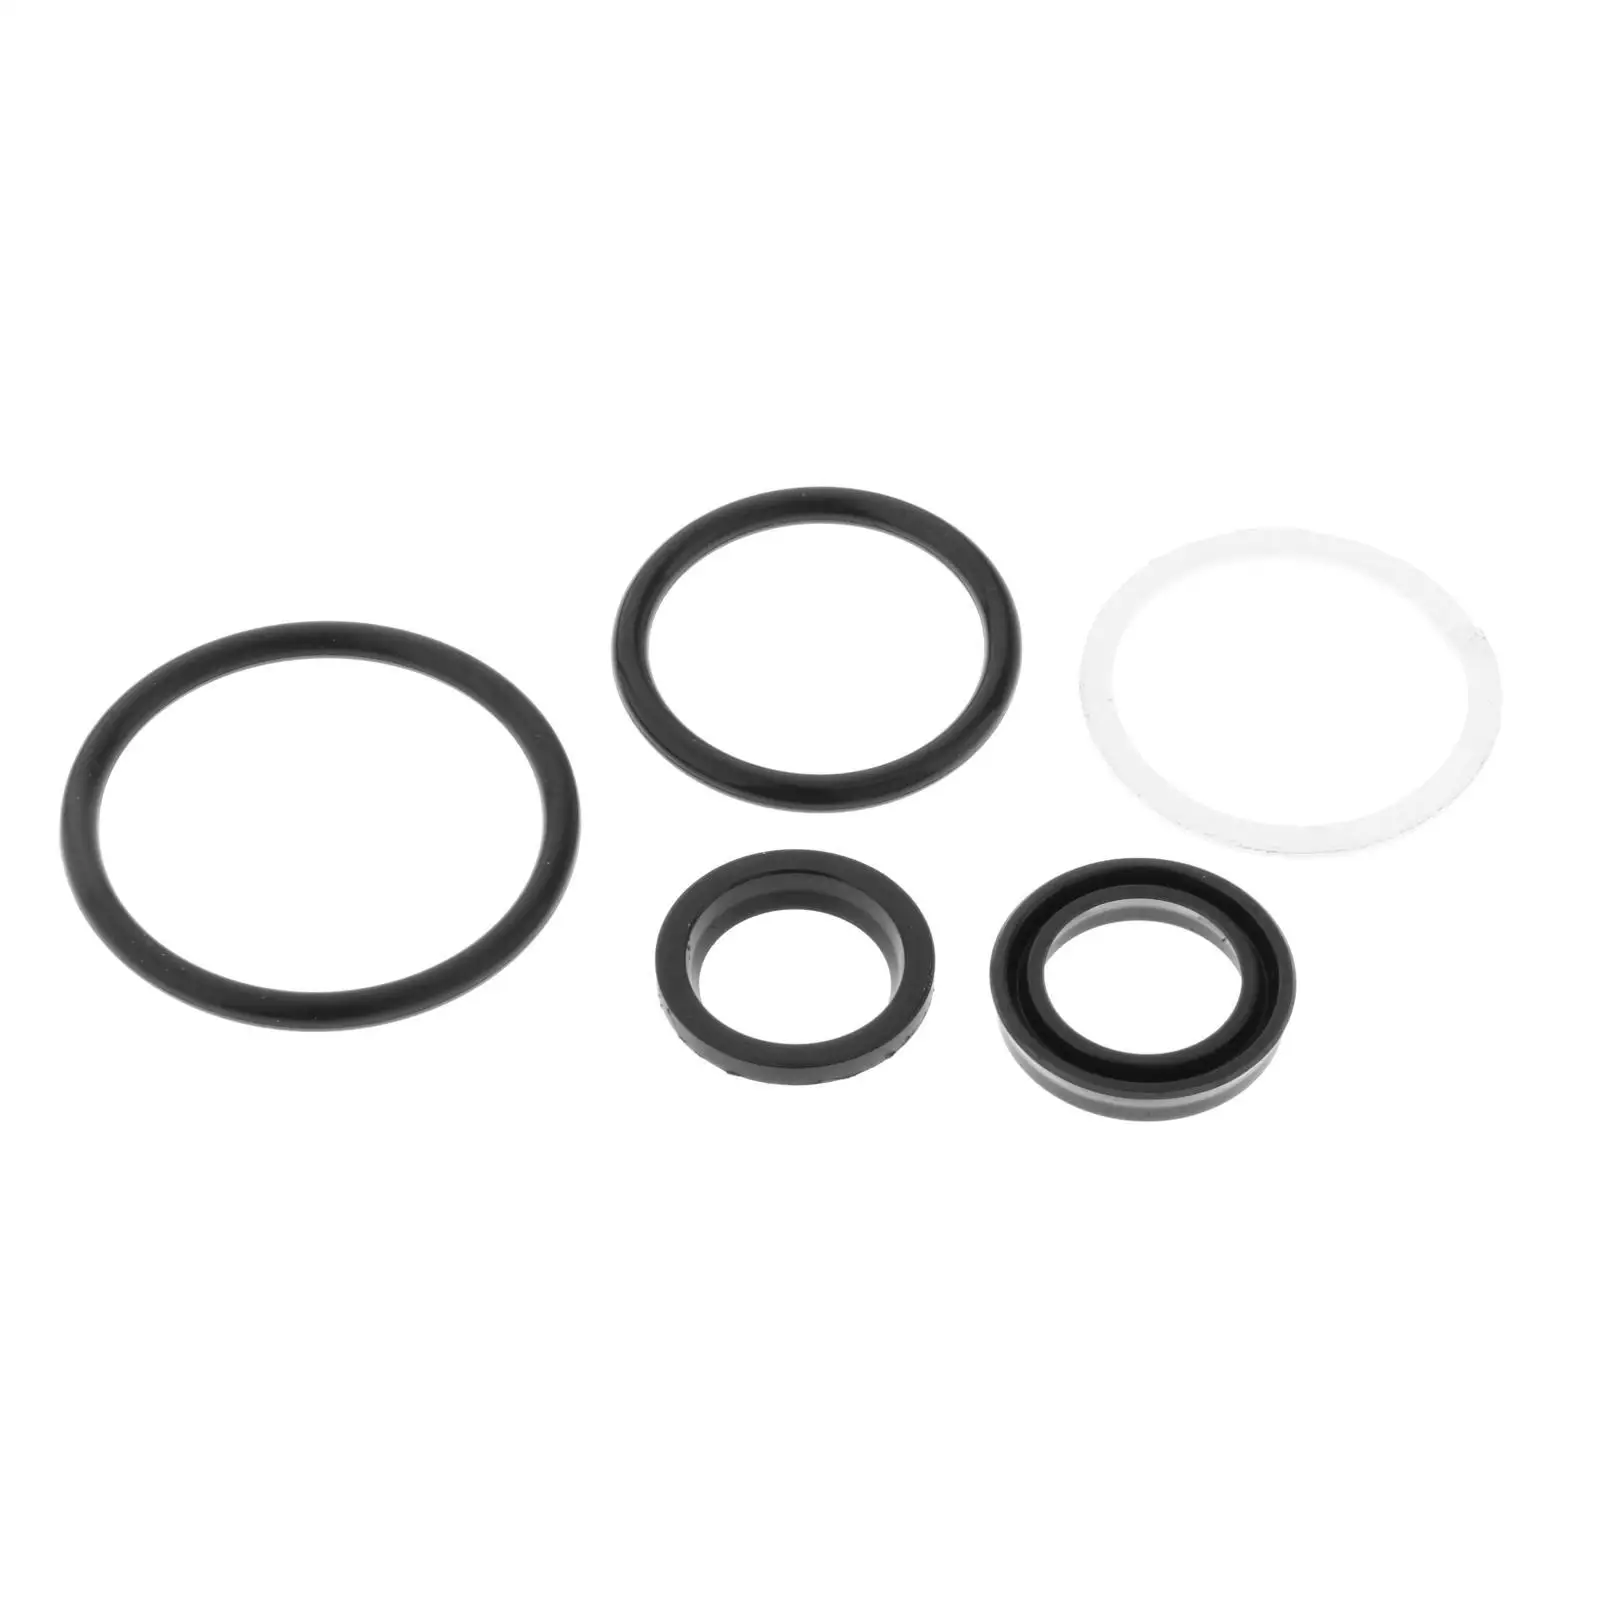 Seal and O-Ring Screw Kit Replacement Spare Parts Fit for Yamaha Outboard High Performance